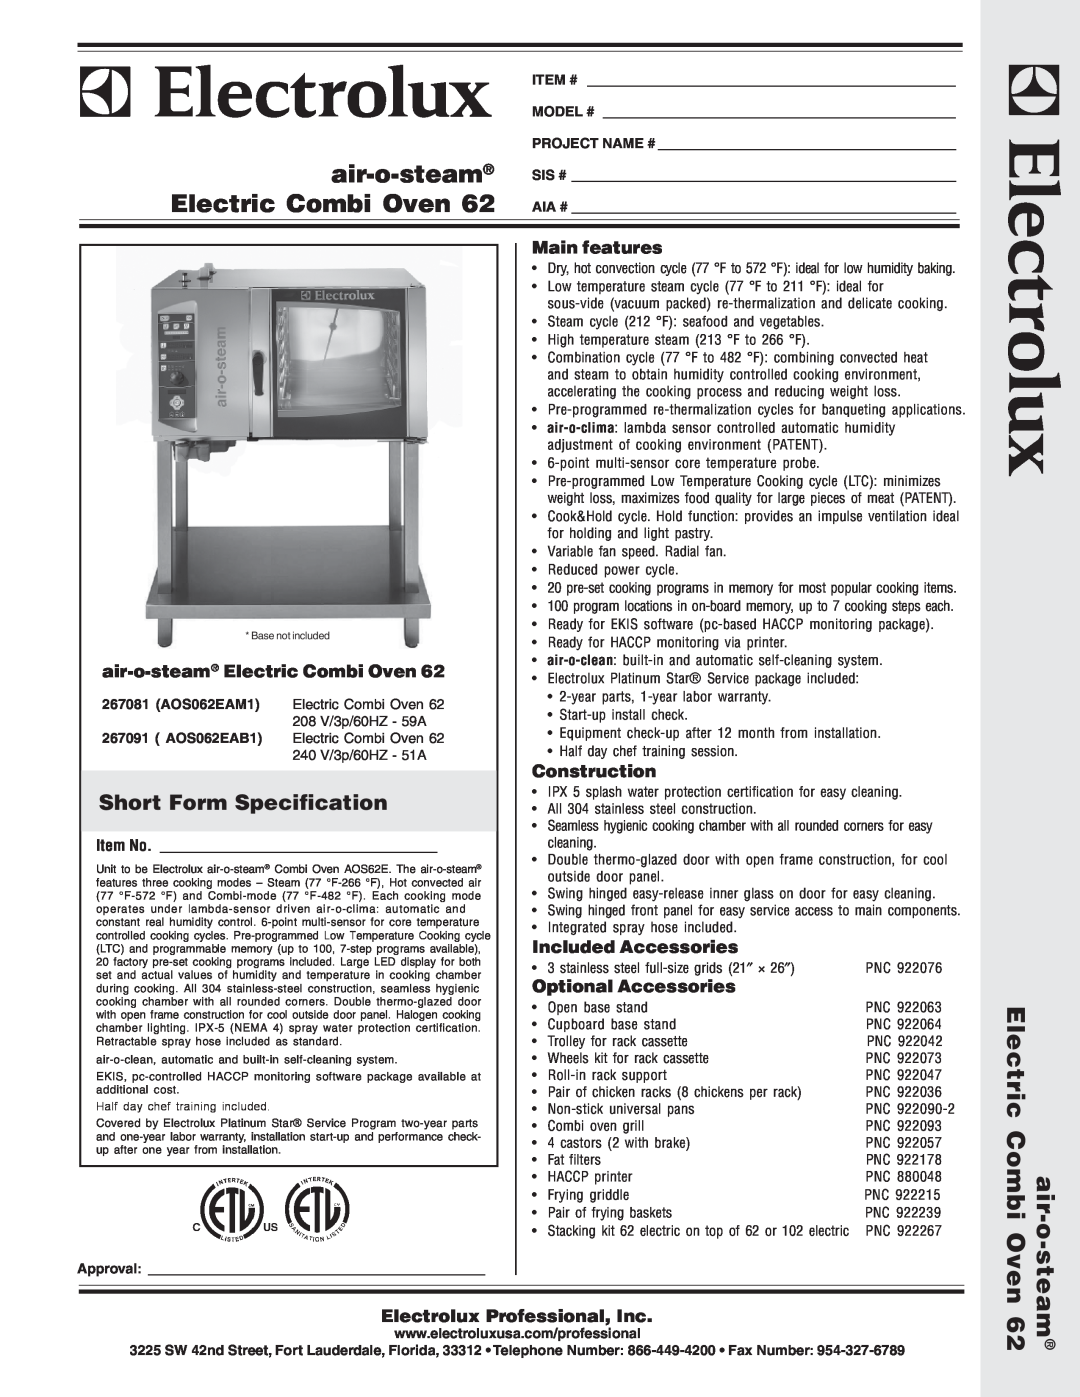 Electrolux AOS062EAB1 warranty Short Form Specification, air-o-steam Electric Combi Oven, Main features, Construction 